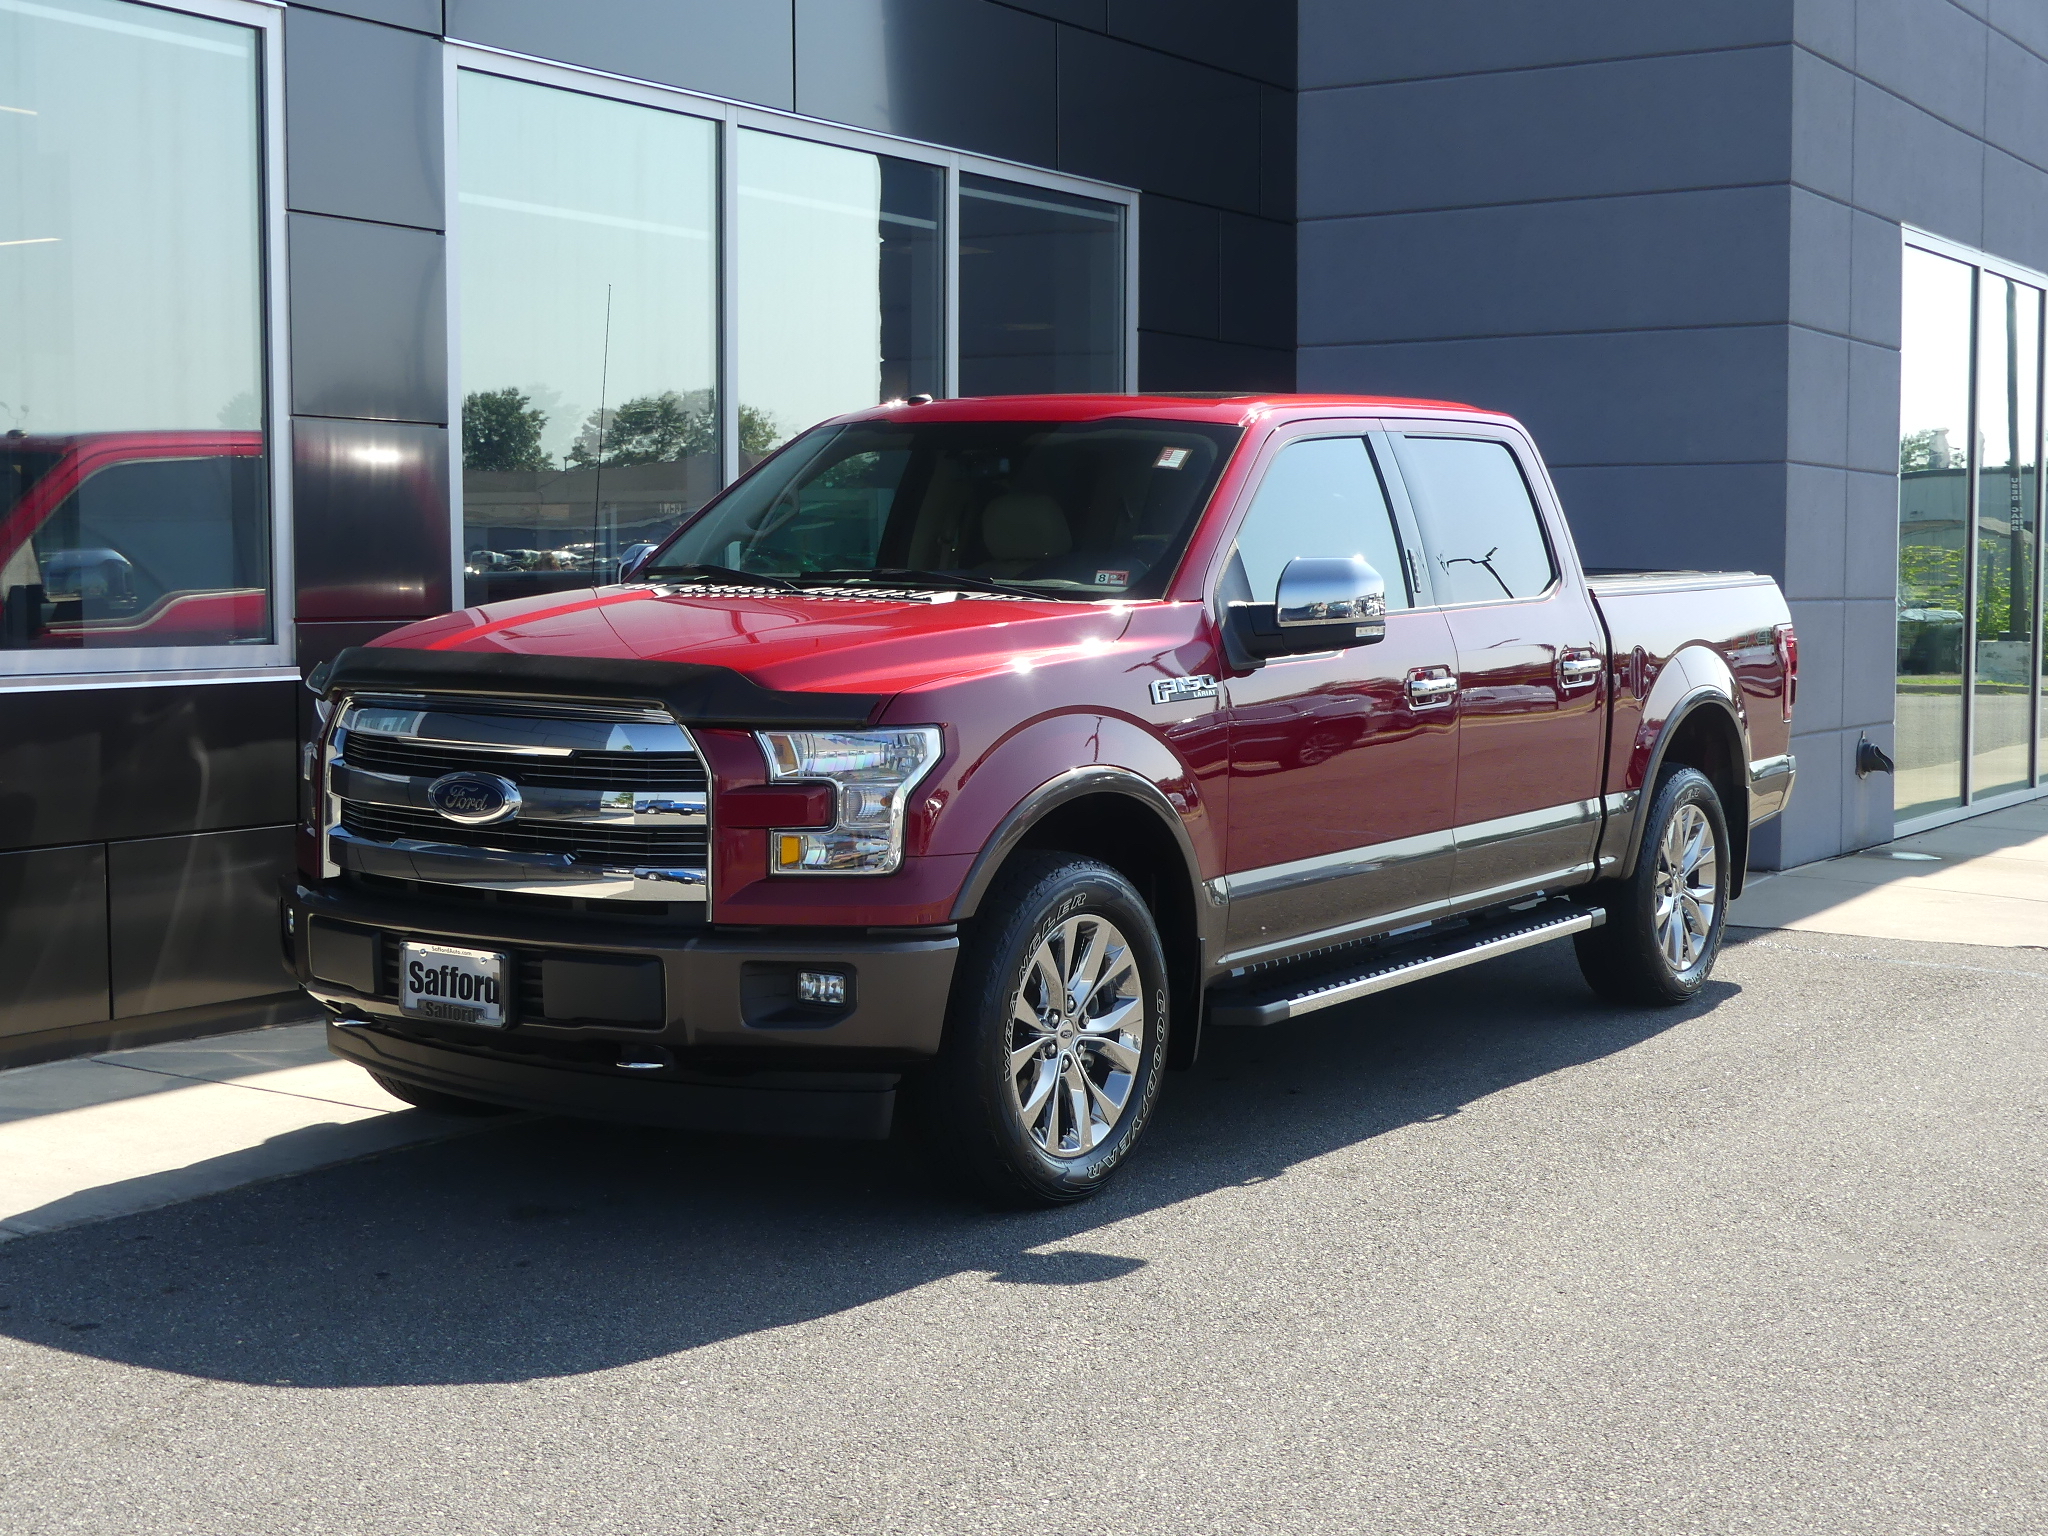 3. 2017 Ford F-150 Lariat for sale on Craigslist - wide 7